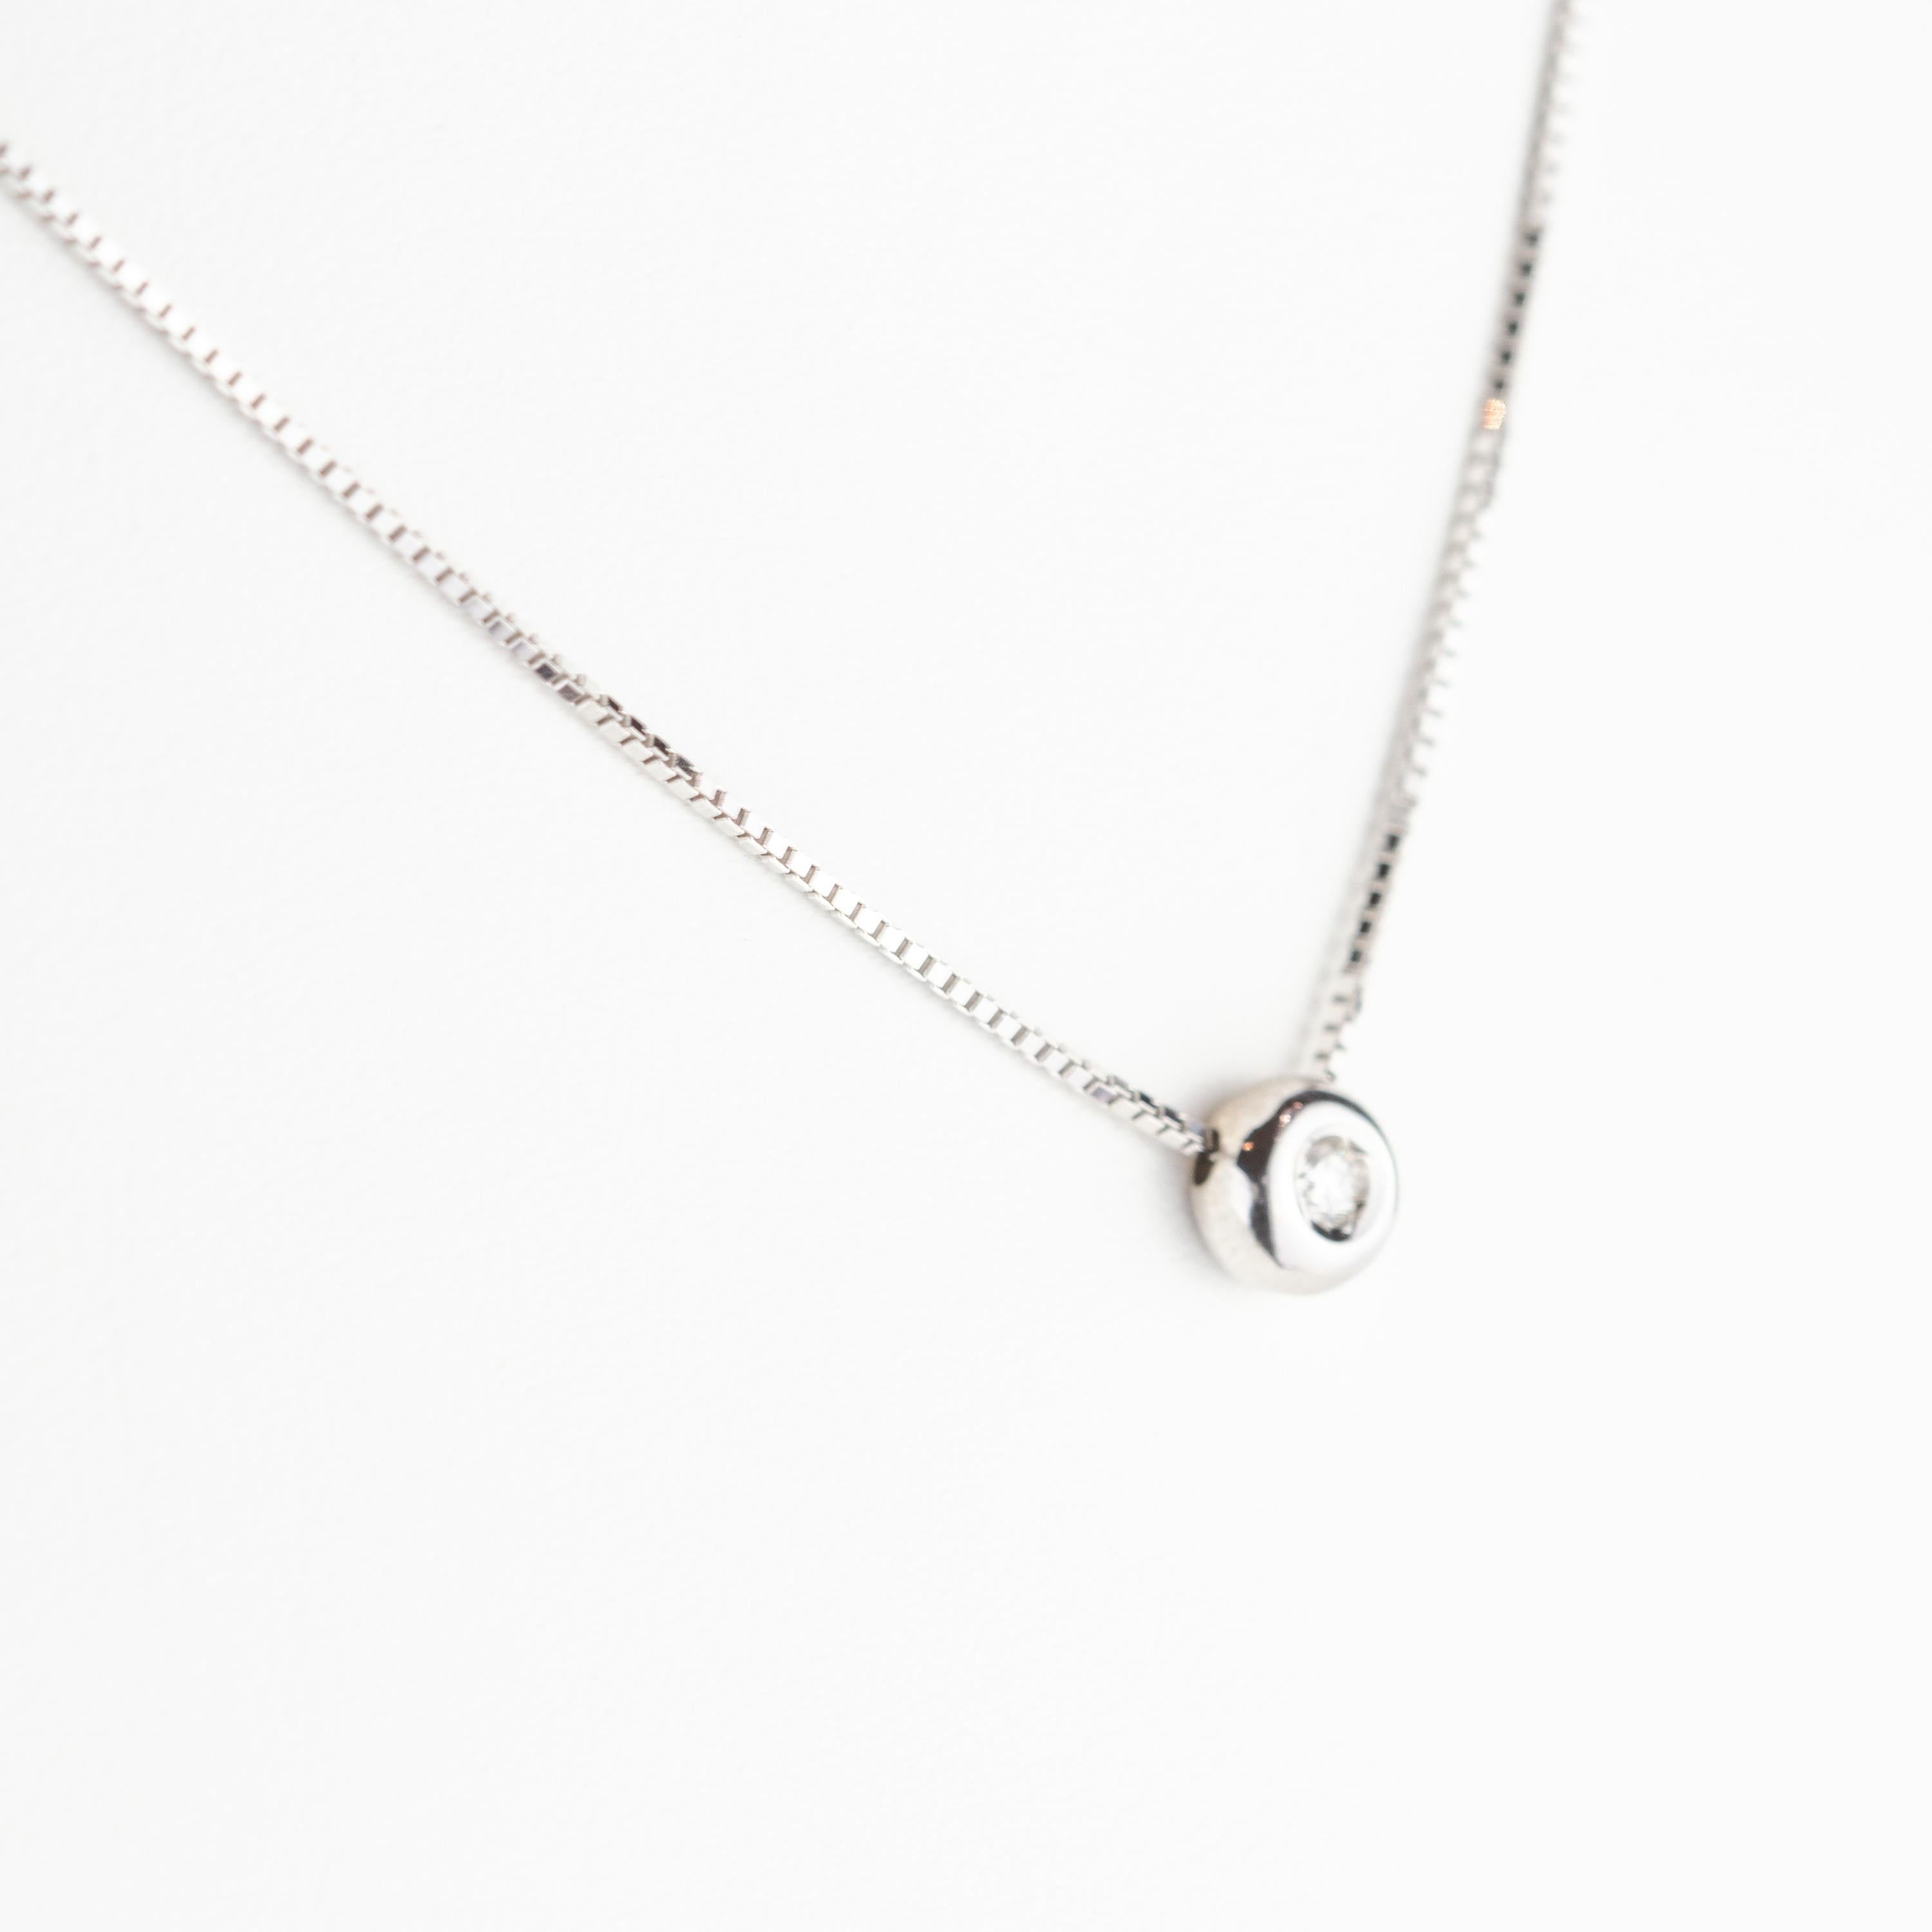 white gold chain with pendant